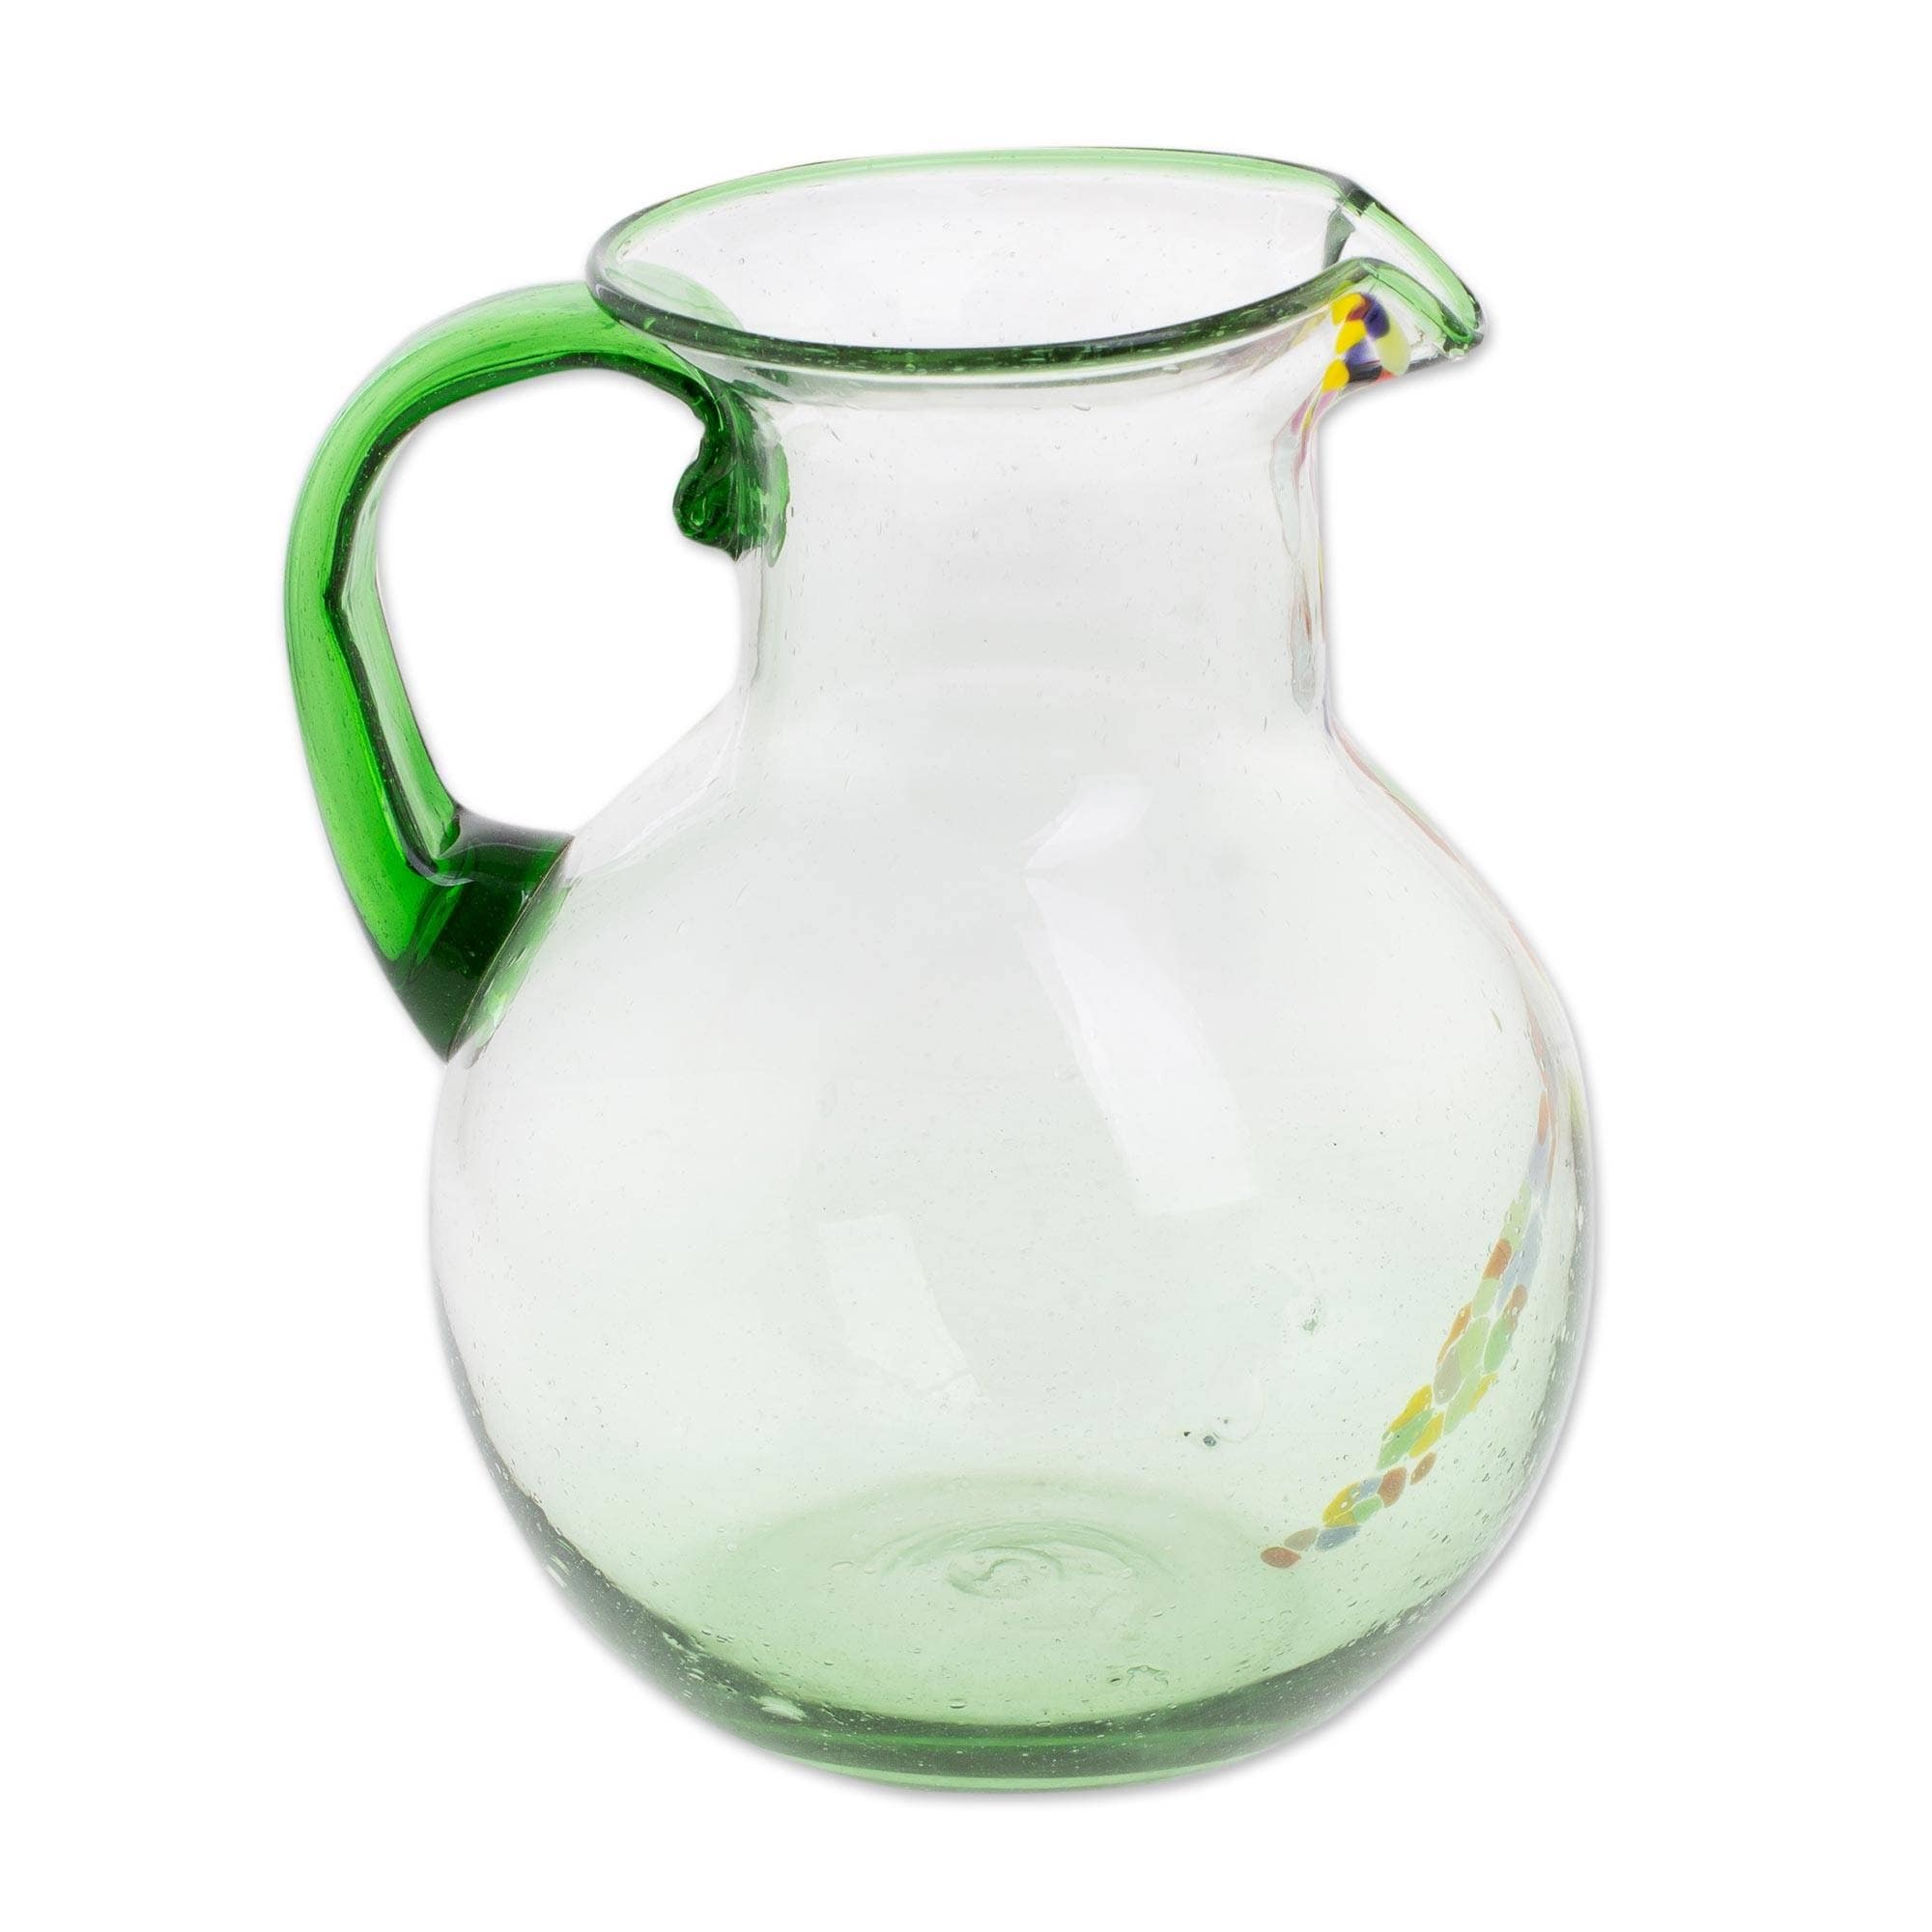 https://ak1.ostkcdn.com/images/products/is/images/direct/79723d2d81589a6e4e77eeebb52f1903d89f103d/Handmade-Conga-Line-Recycled-Glass-Pitcher-%28Guatemala%29.jpg